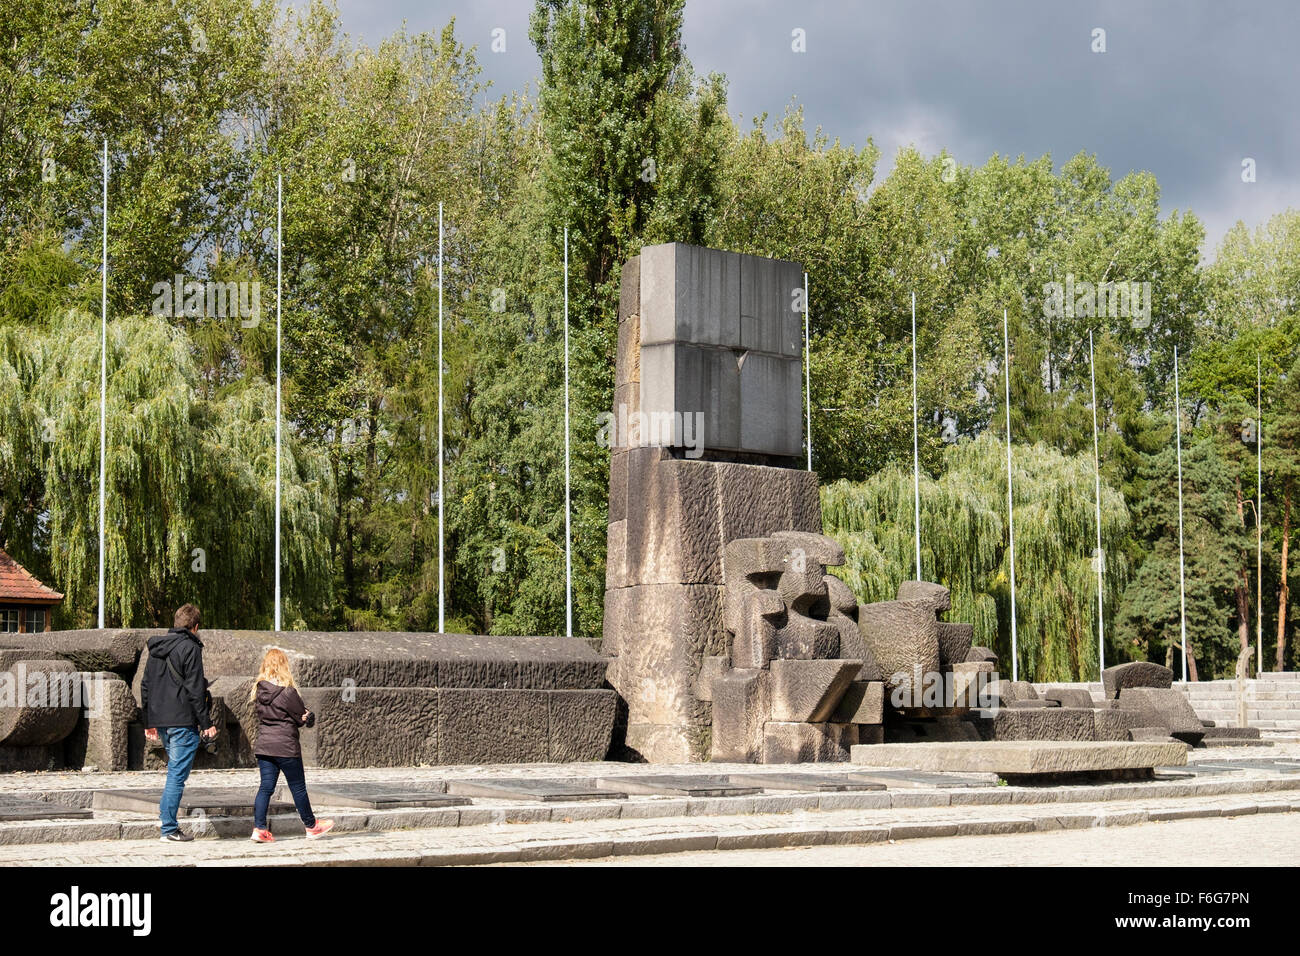 Memorial to 1.5 million murdered by Nazis at Auschwitz II-Birkenau German Nazi Concentration and Extermination Camp in Oswiecim, Poland Stock Photo